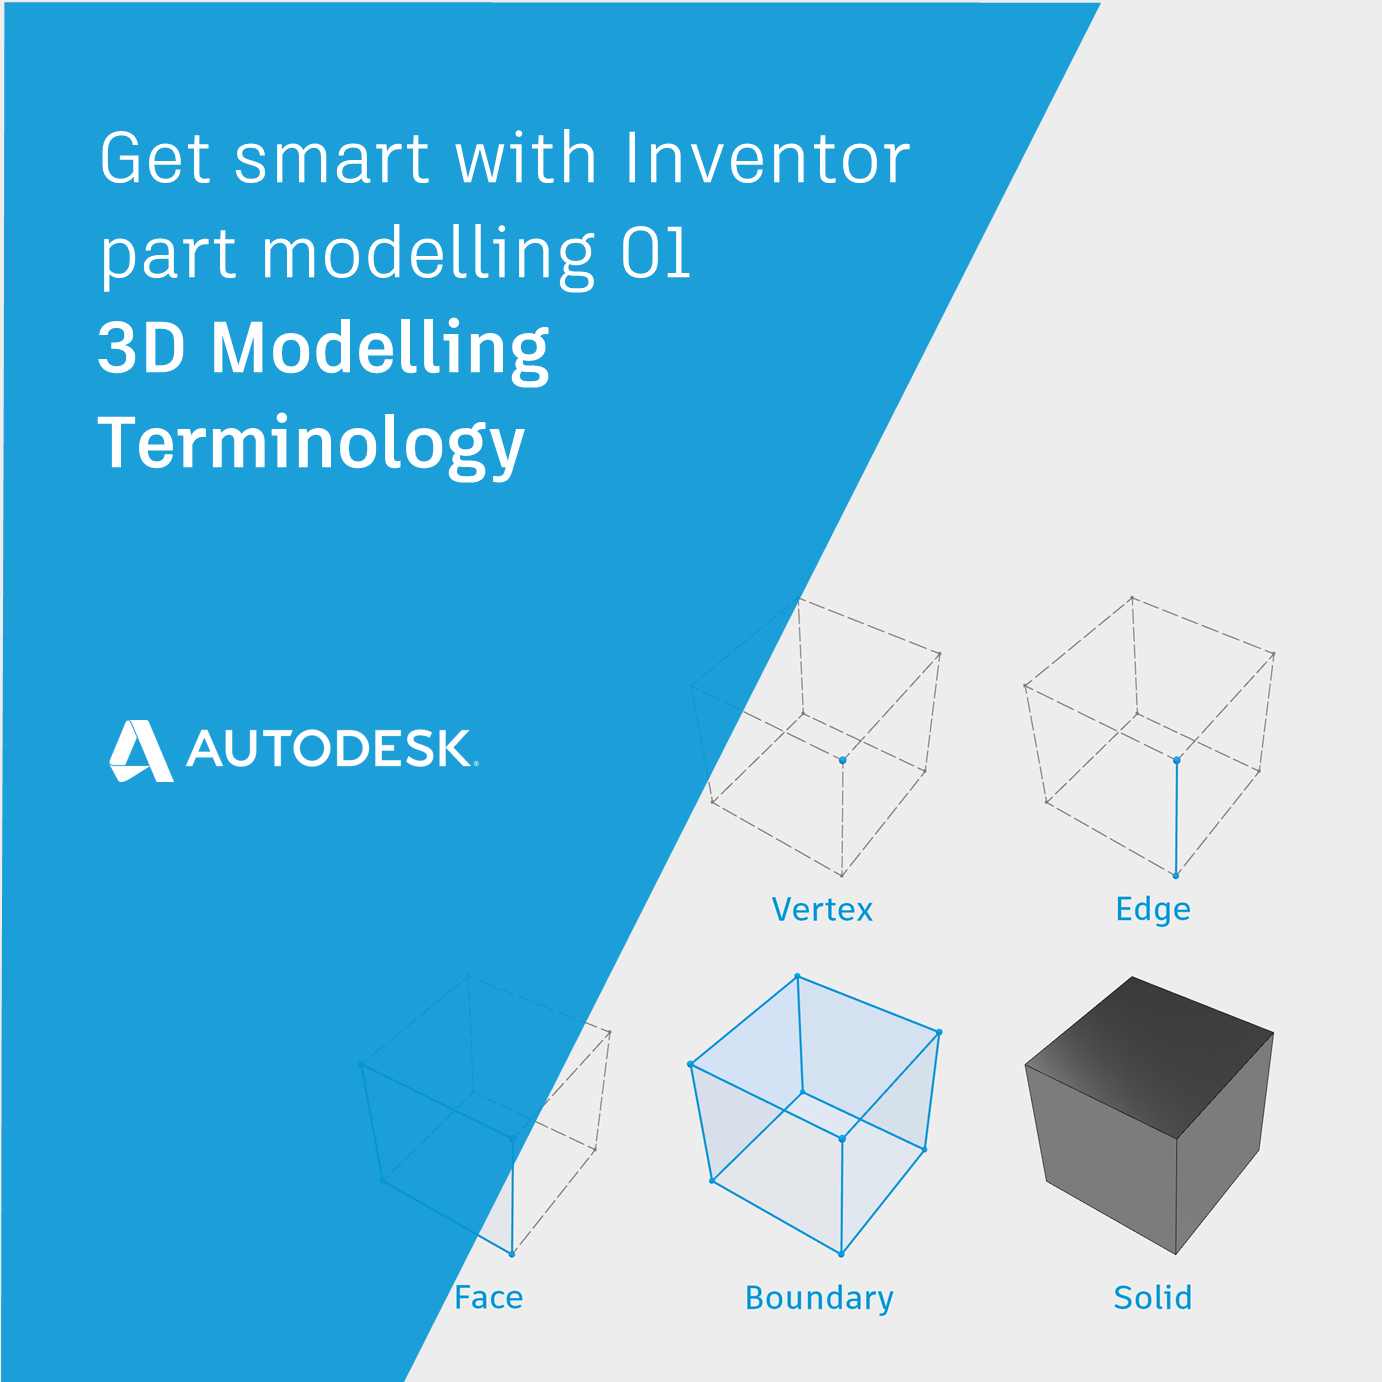 3D Modelling Terminology | Get Smart with Inventor Part Modeling 01